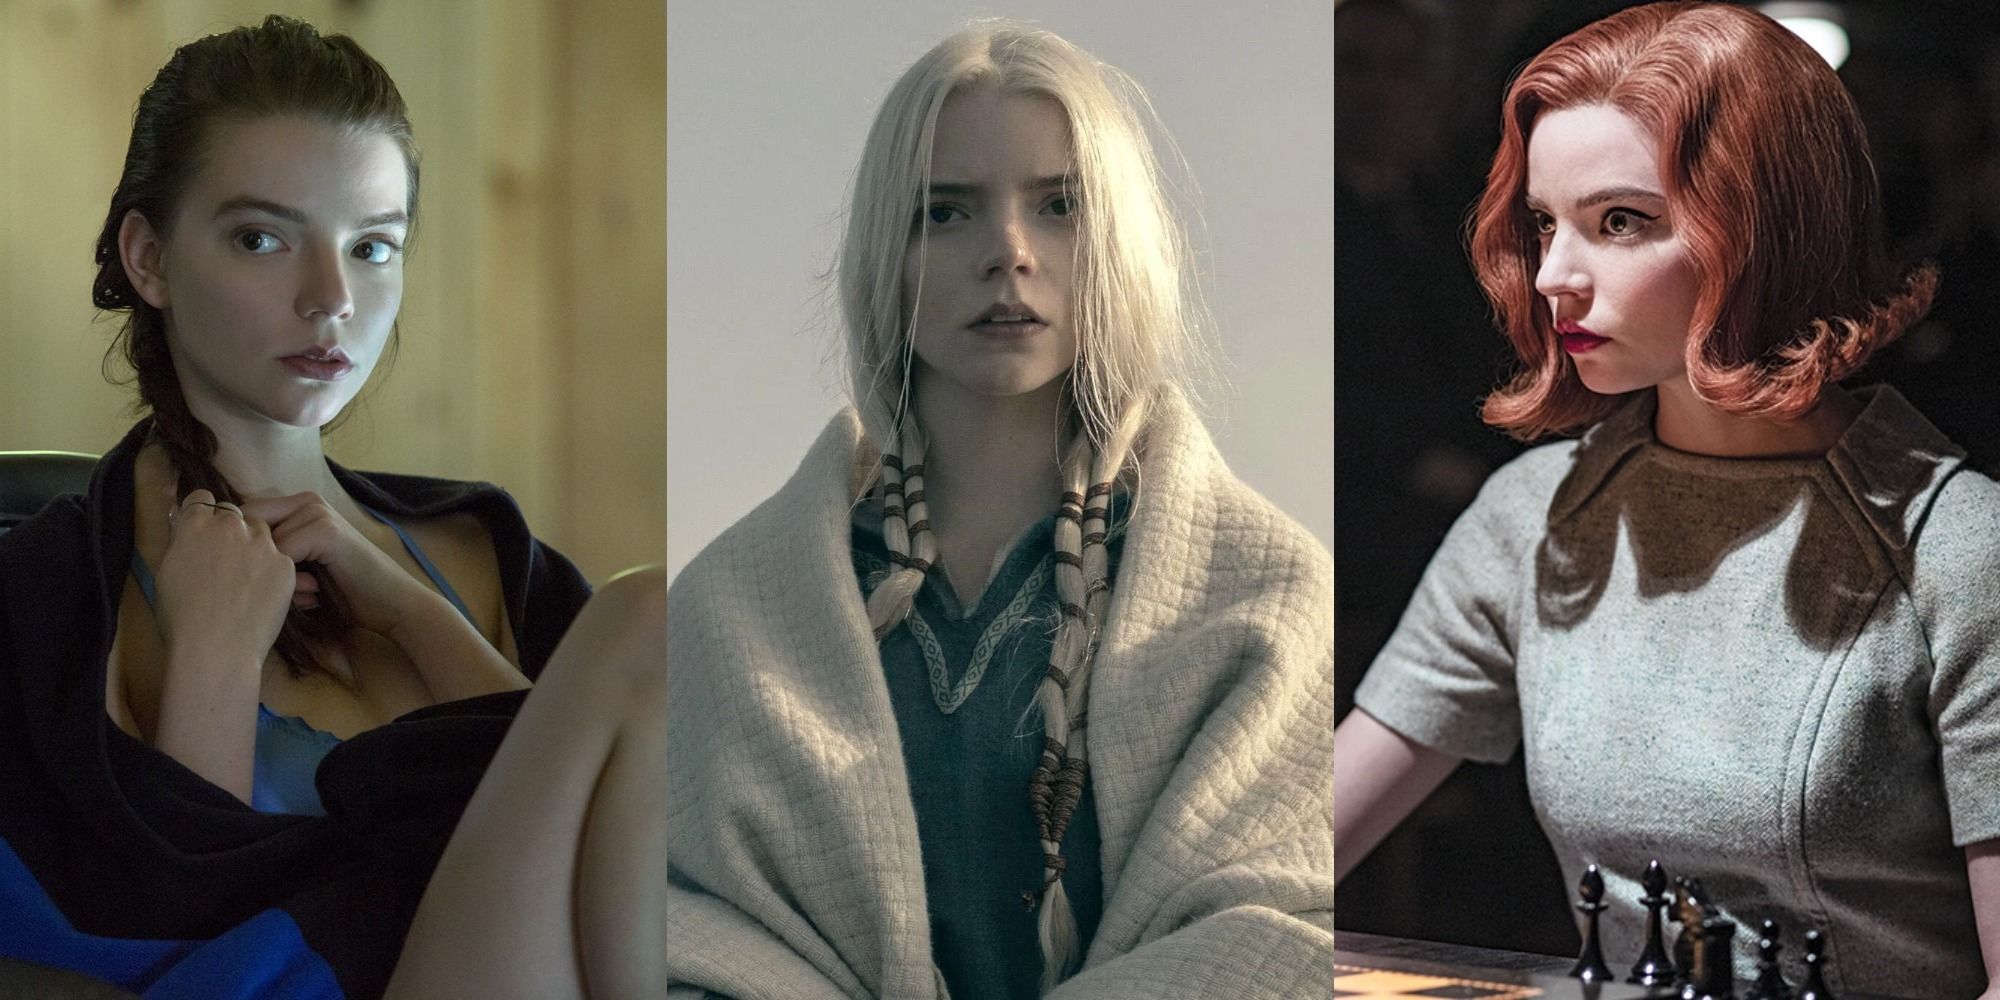 Anya Taylor-Joy List of Movies and TV Shows - TV Guide